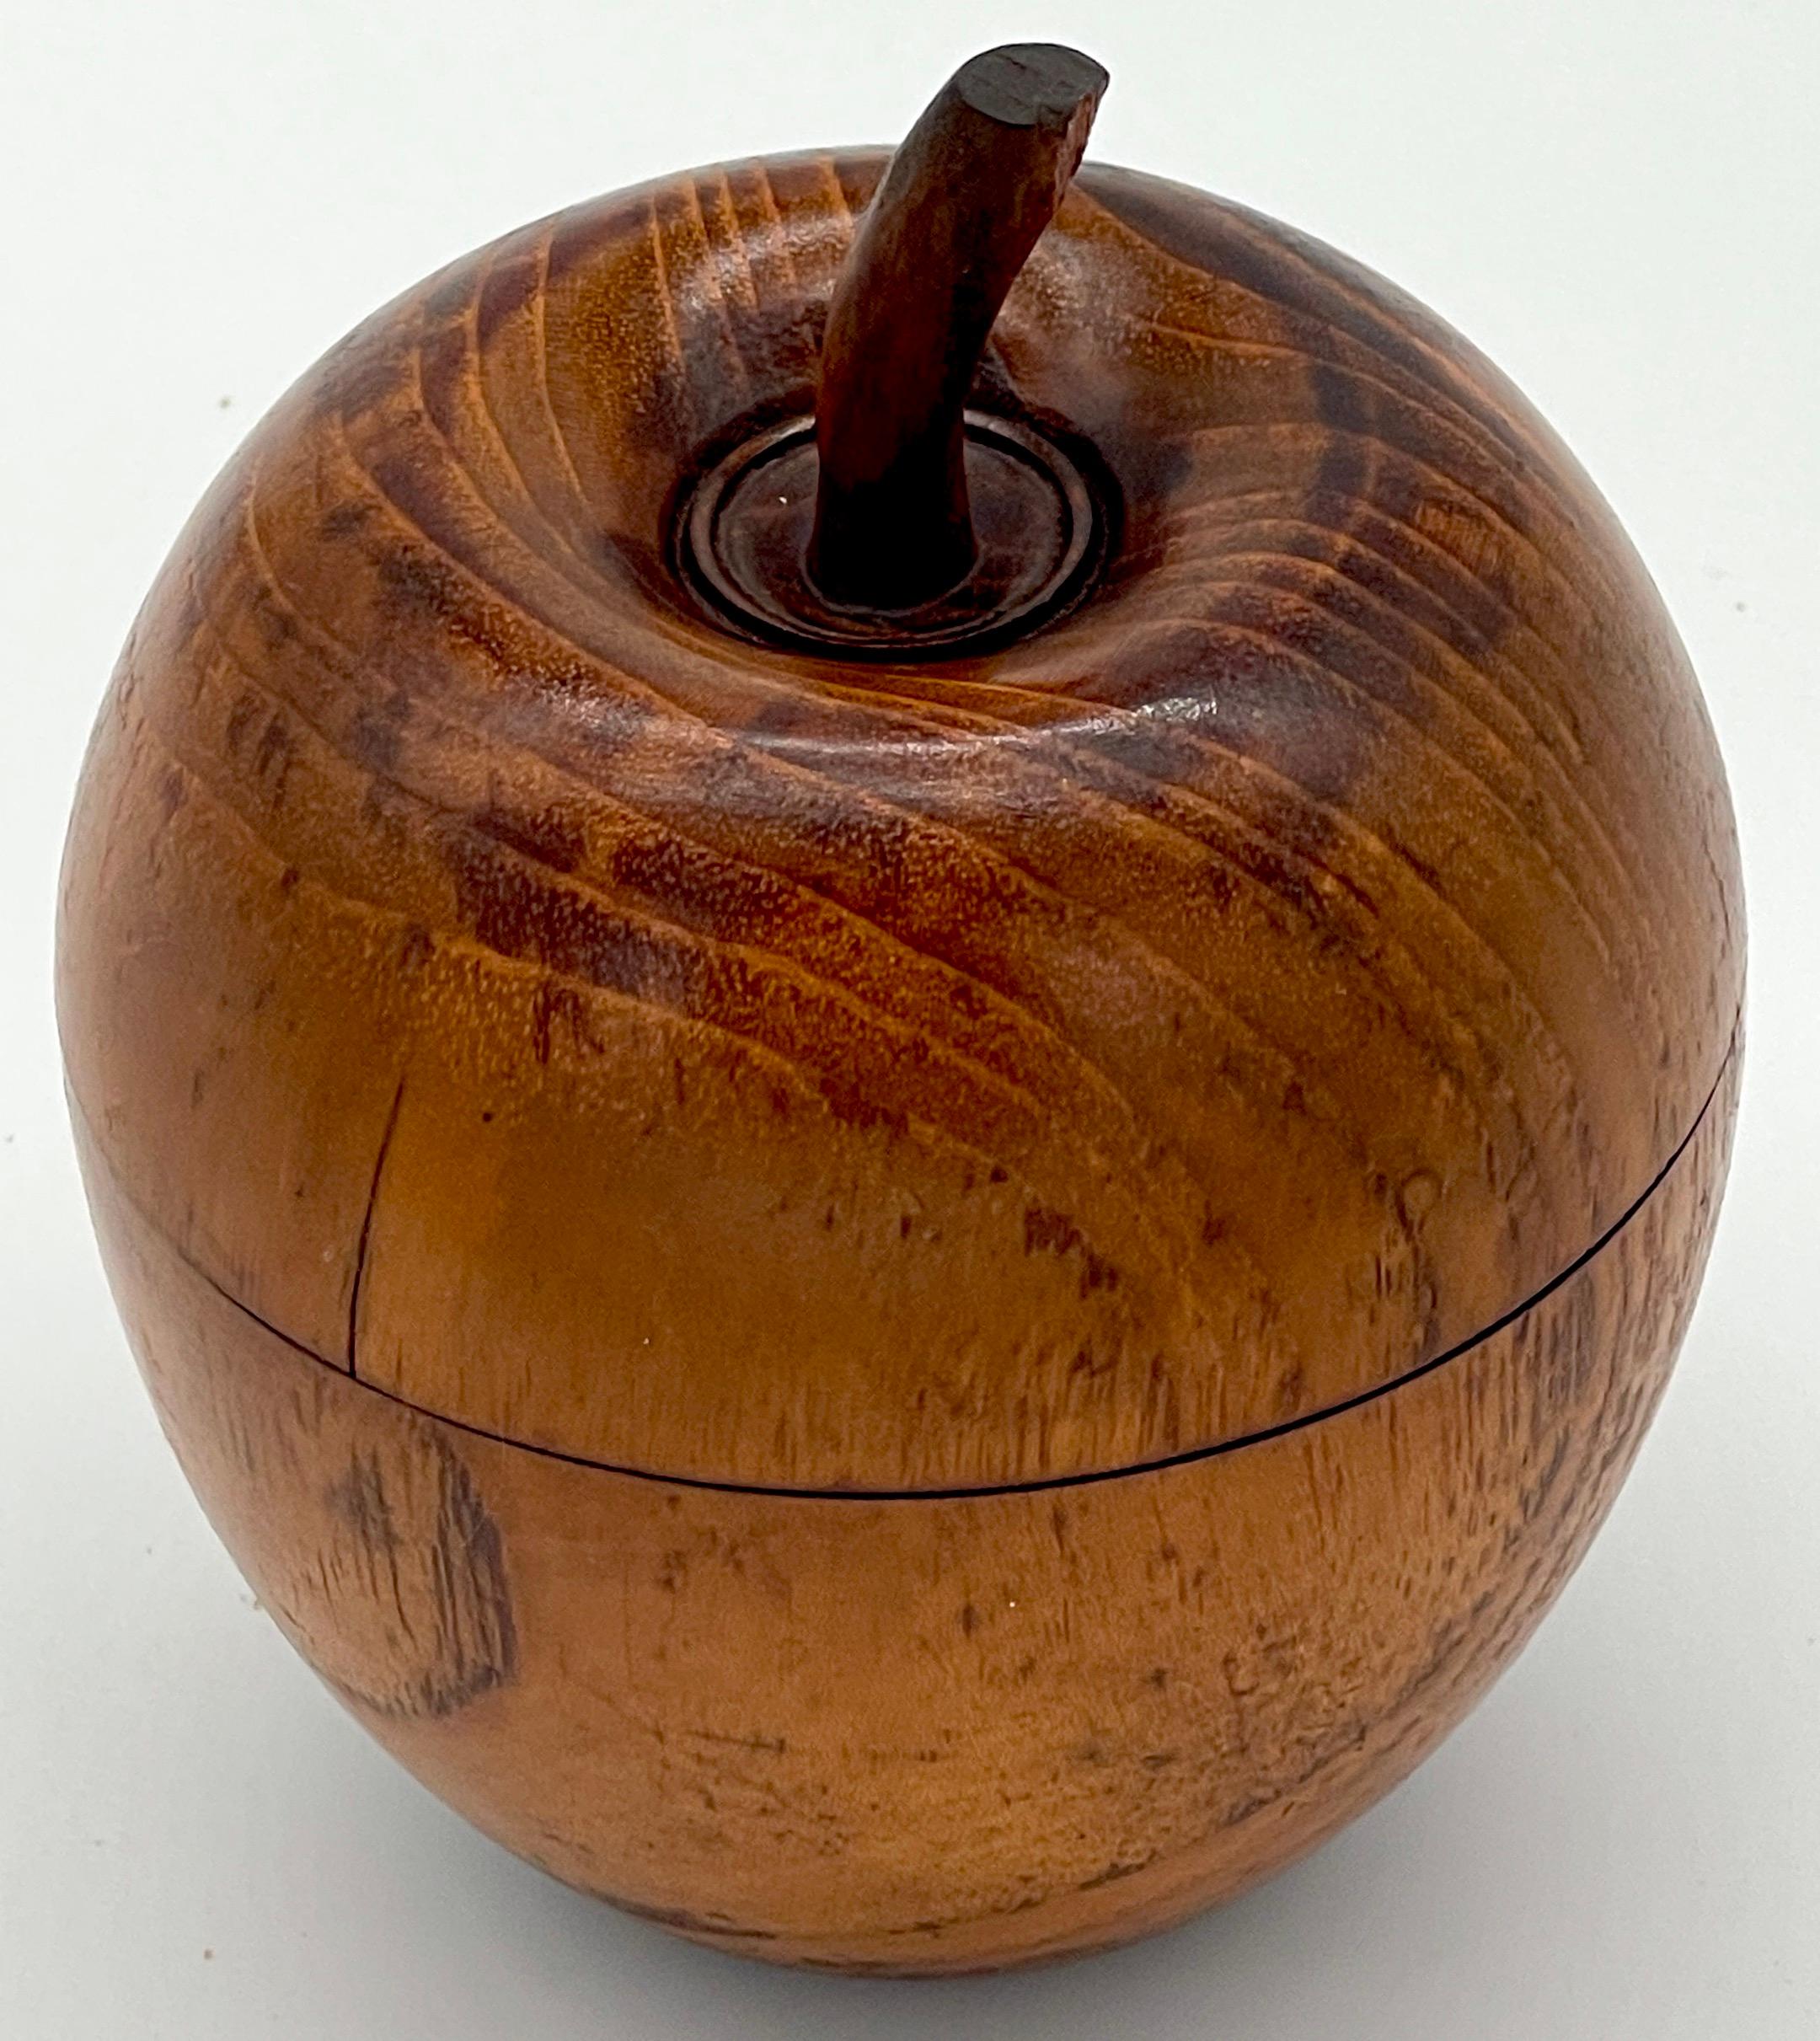 American Treen Apple Motif Tea Caddy, 1900s

American Treen apple motif tea caddy dating circa early 20th Century, a delightful testament to the artistry of its time. Meticulously carved from wood, this charming piece comes in two parts, with a lift